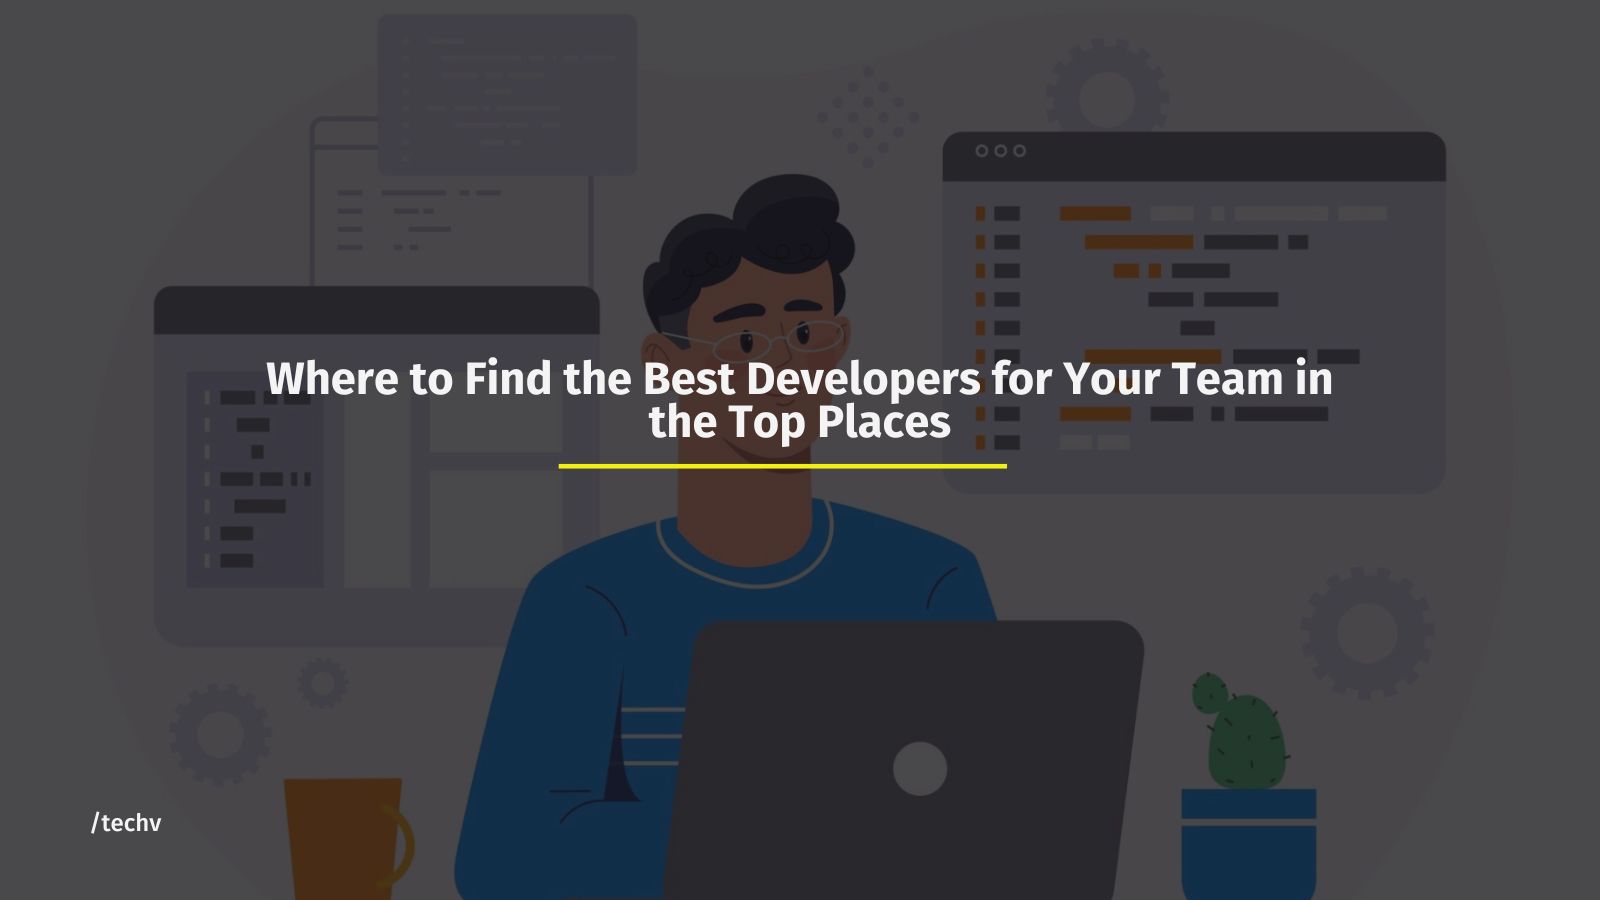 Where to Find the Best Developers for Your Team in the Top Places